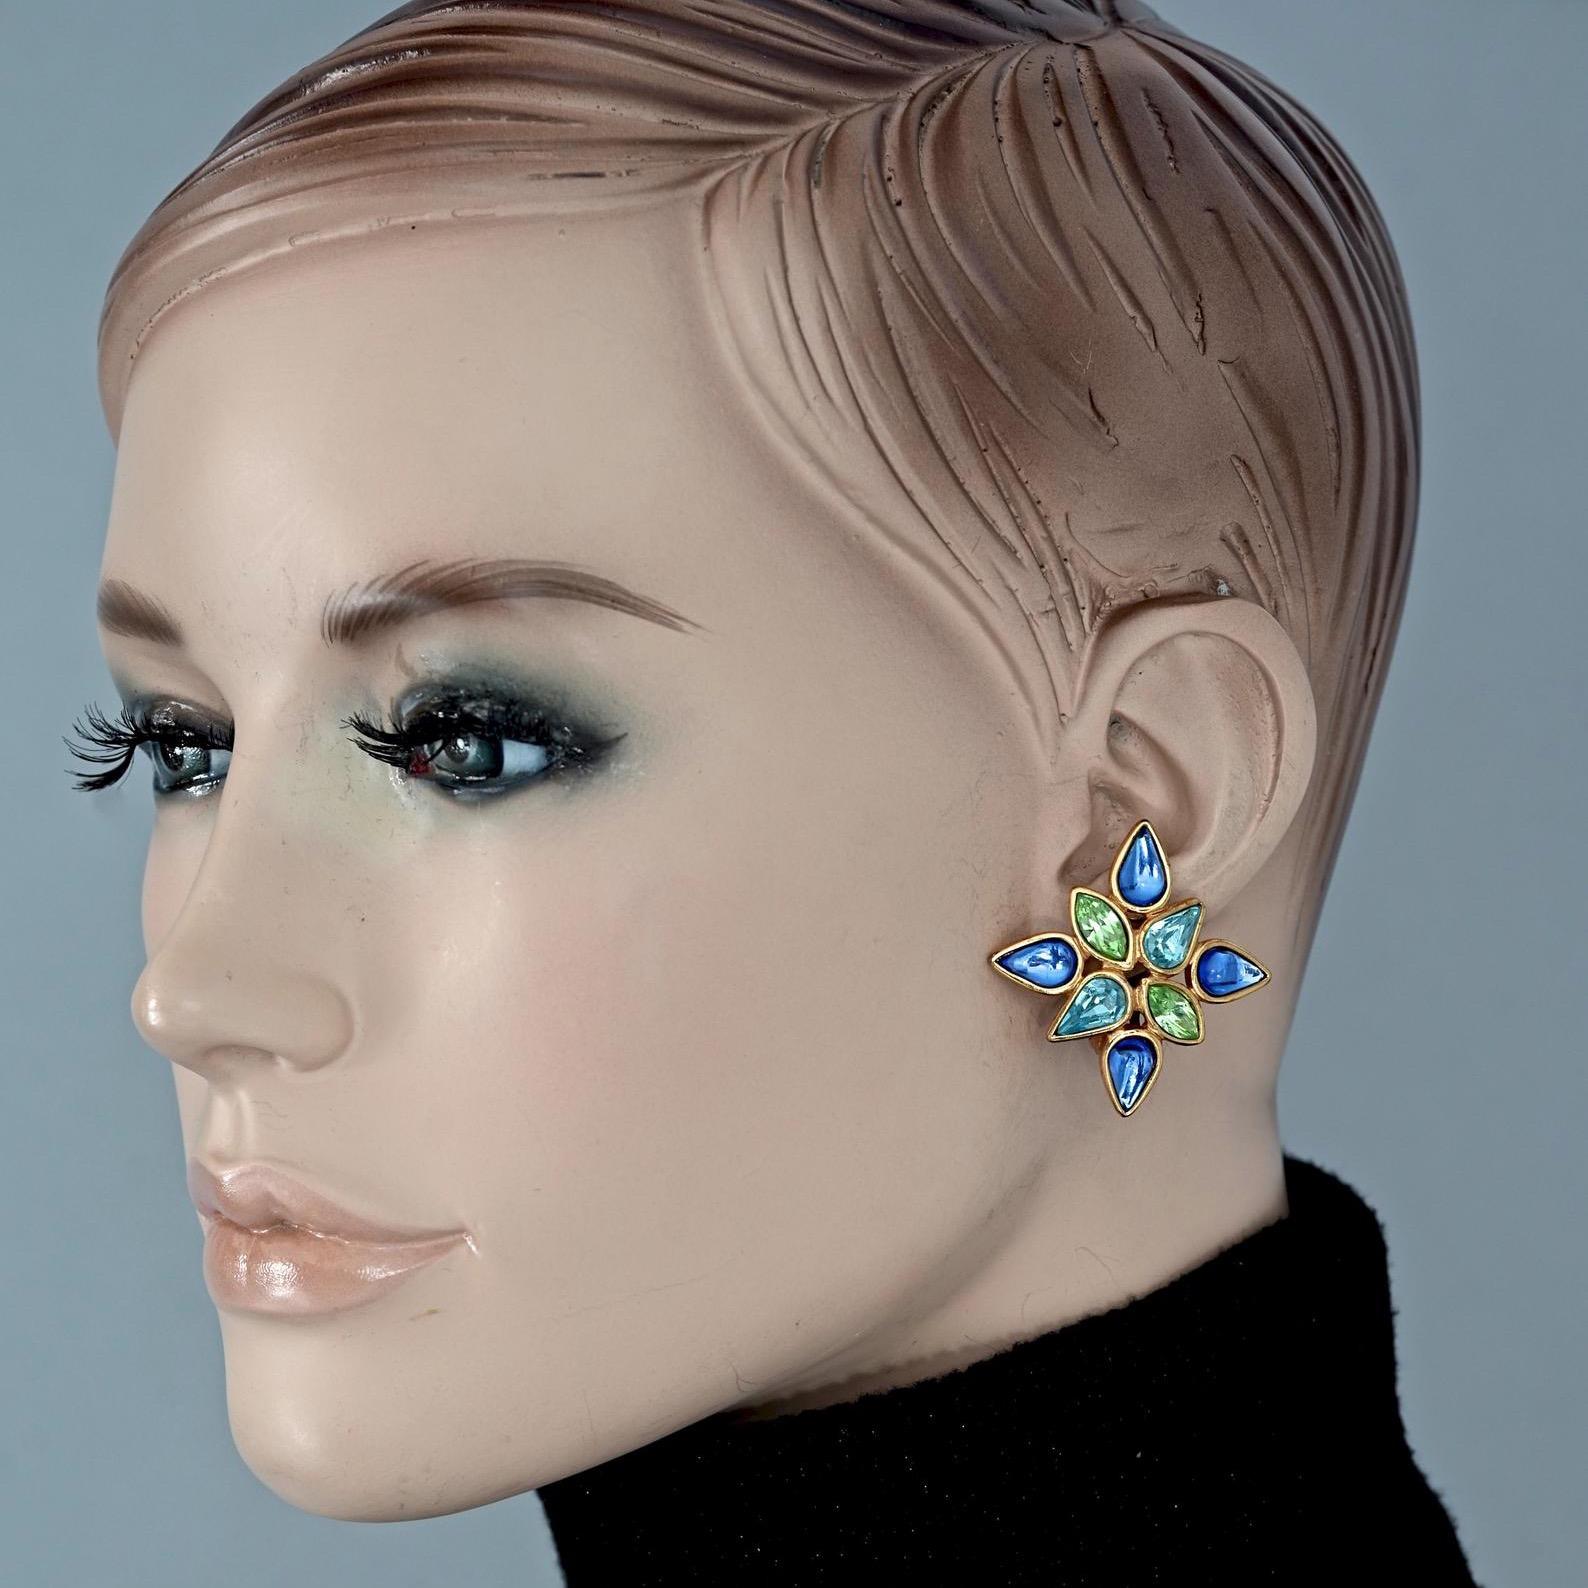 Vintage YVES SAINT LAURENT Ysl Blue Green Rhinestones Earrings

Measurements:
Height: 1.49 inches (3.8 cm)
Width: 1.49 inches (3.8 cm)
Weight per Earring: 12 grams

Features:
- 100% Authentic YVES SAINT LAURENT.
- Faceted rhinestones in hues of blue